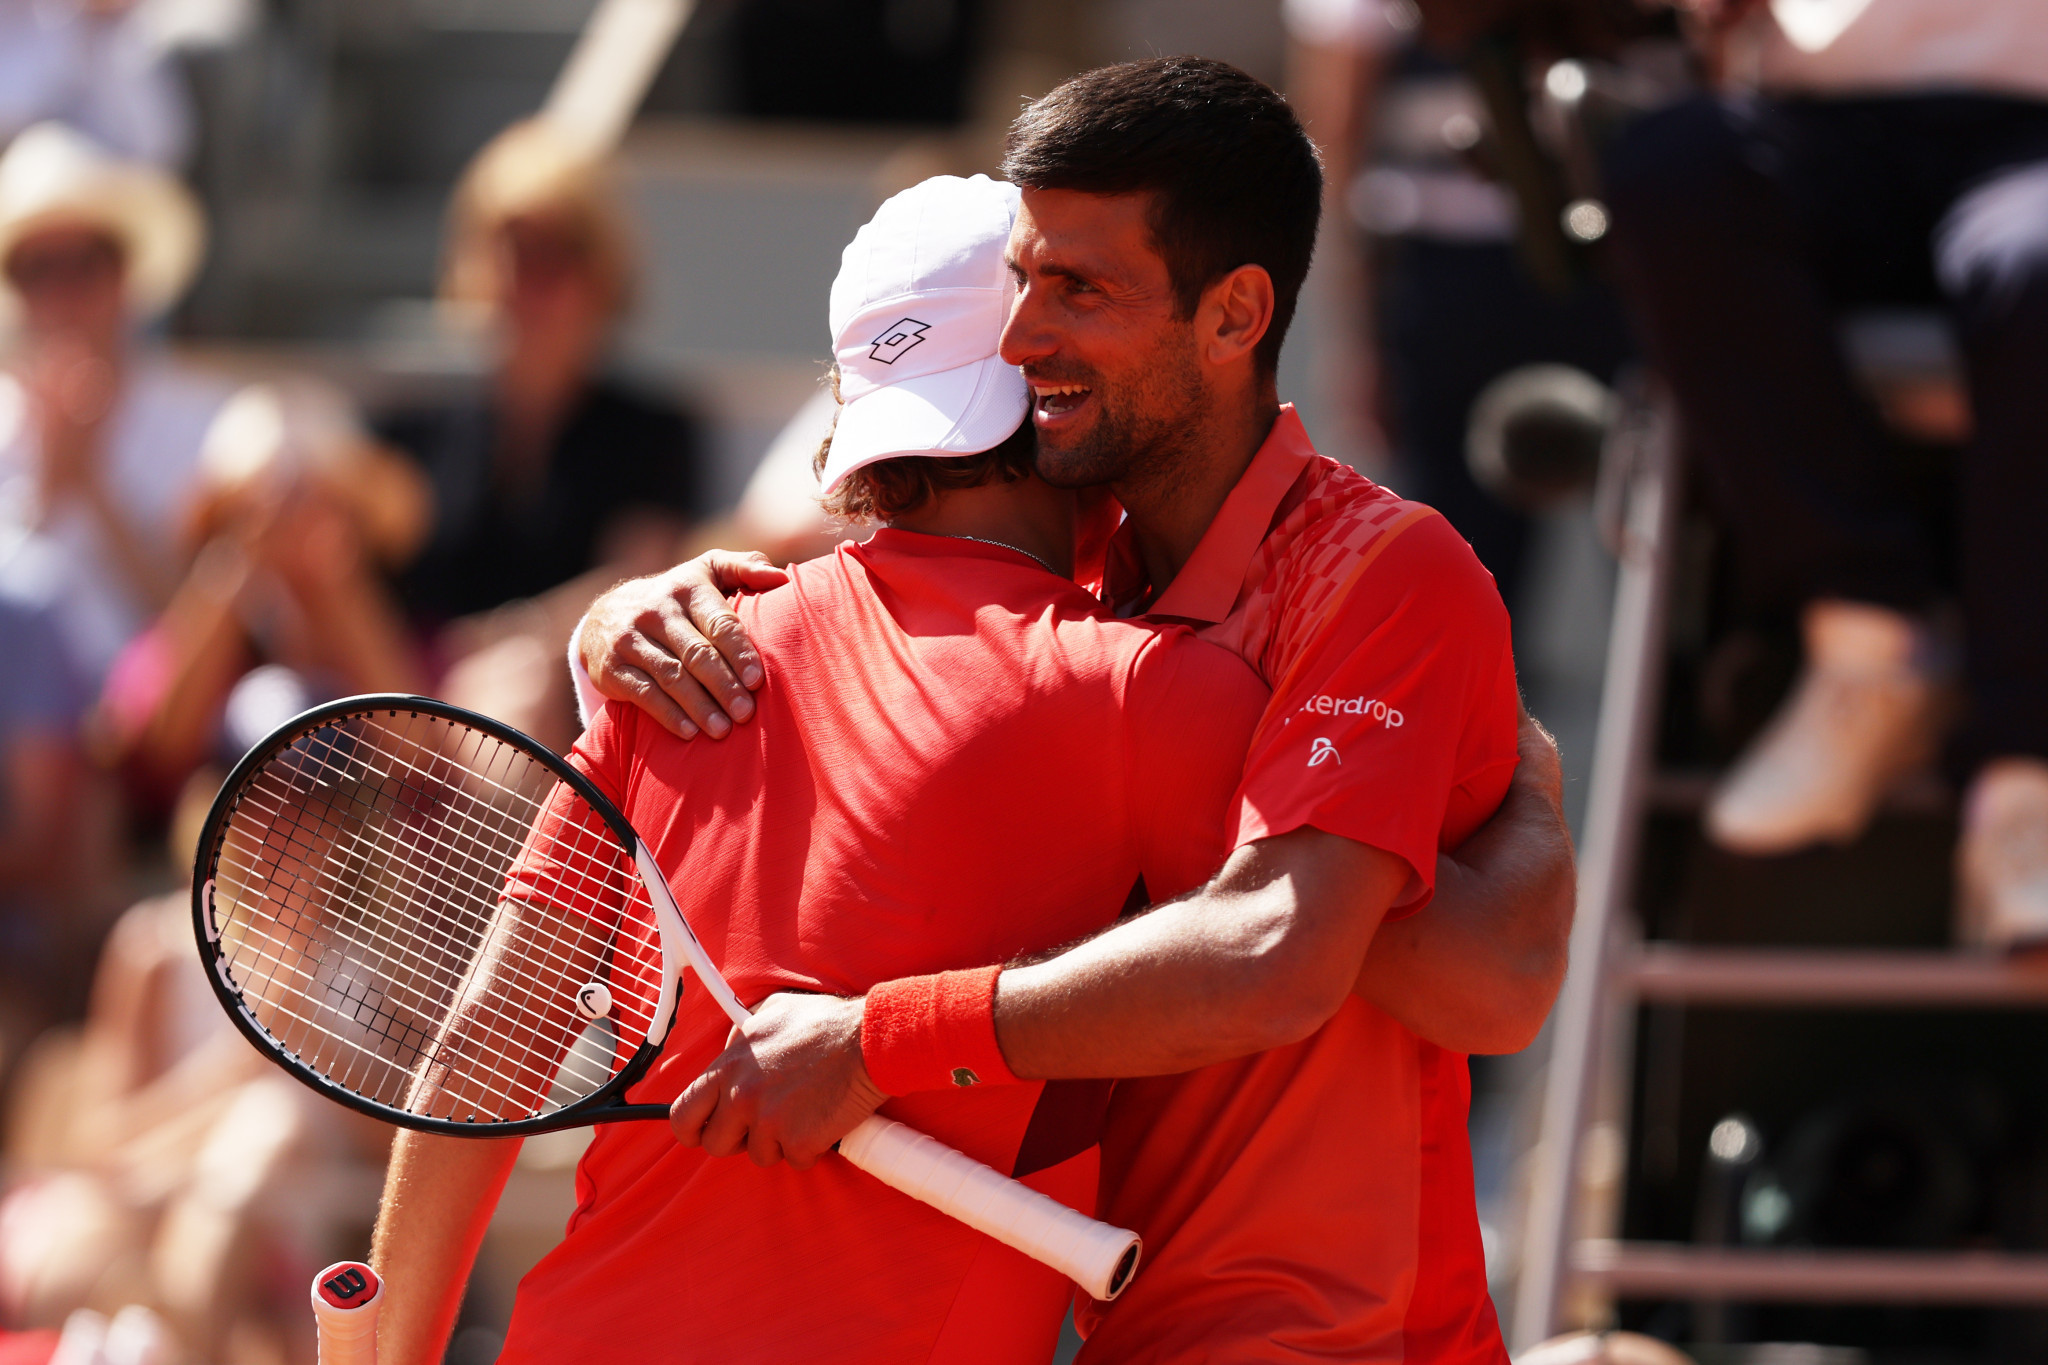 Novak Djokovic wrote his message about Kosovo after his first round match at the French Open ©Getty Images